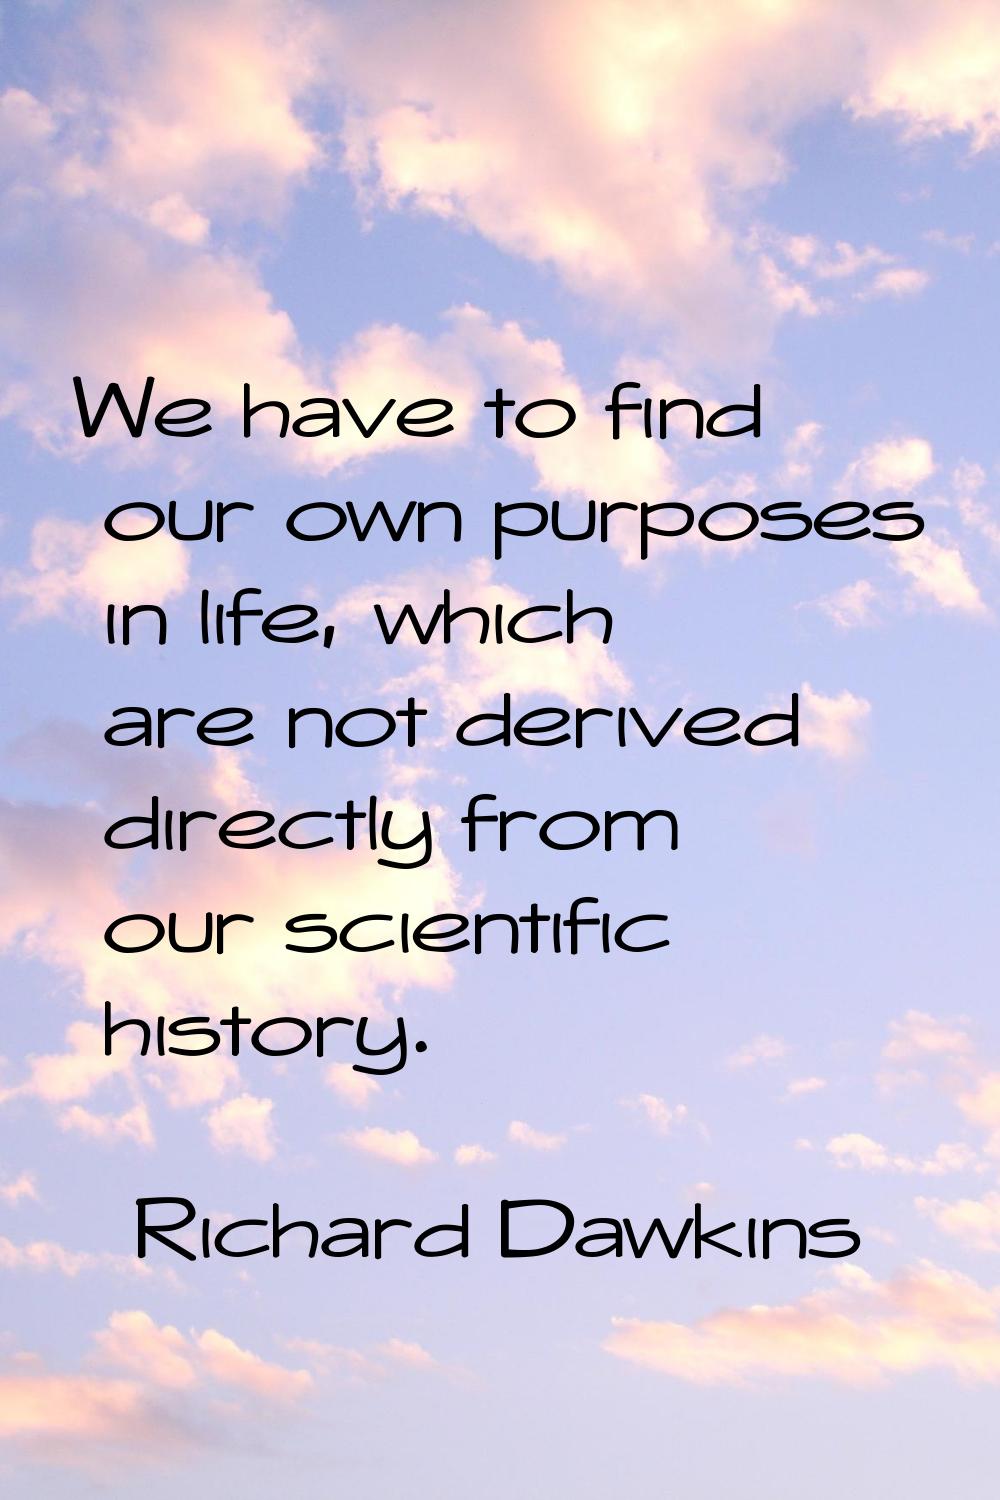 We have to find our own purposes in life, which are not derived directly from our scientific histor